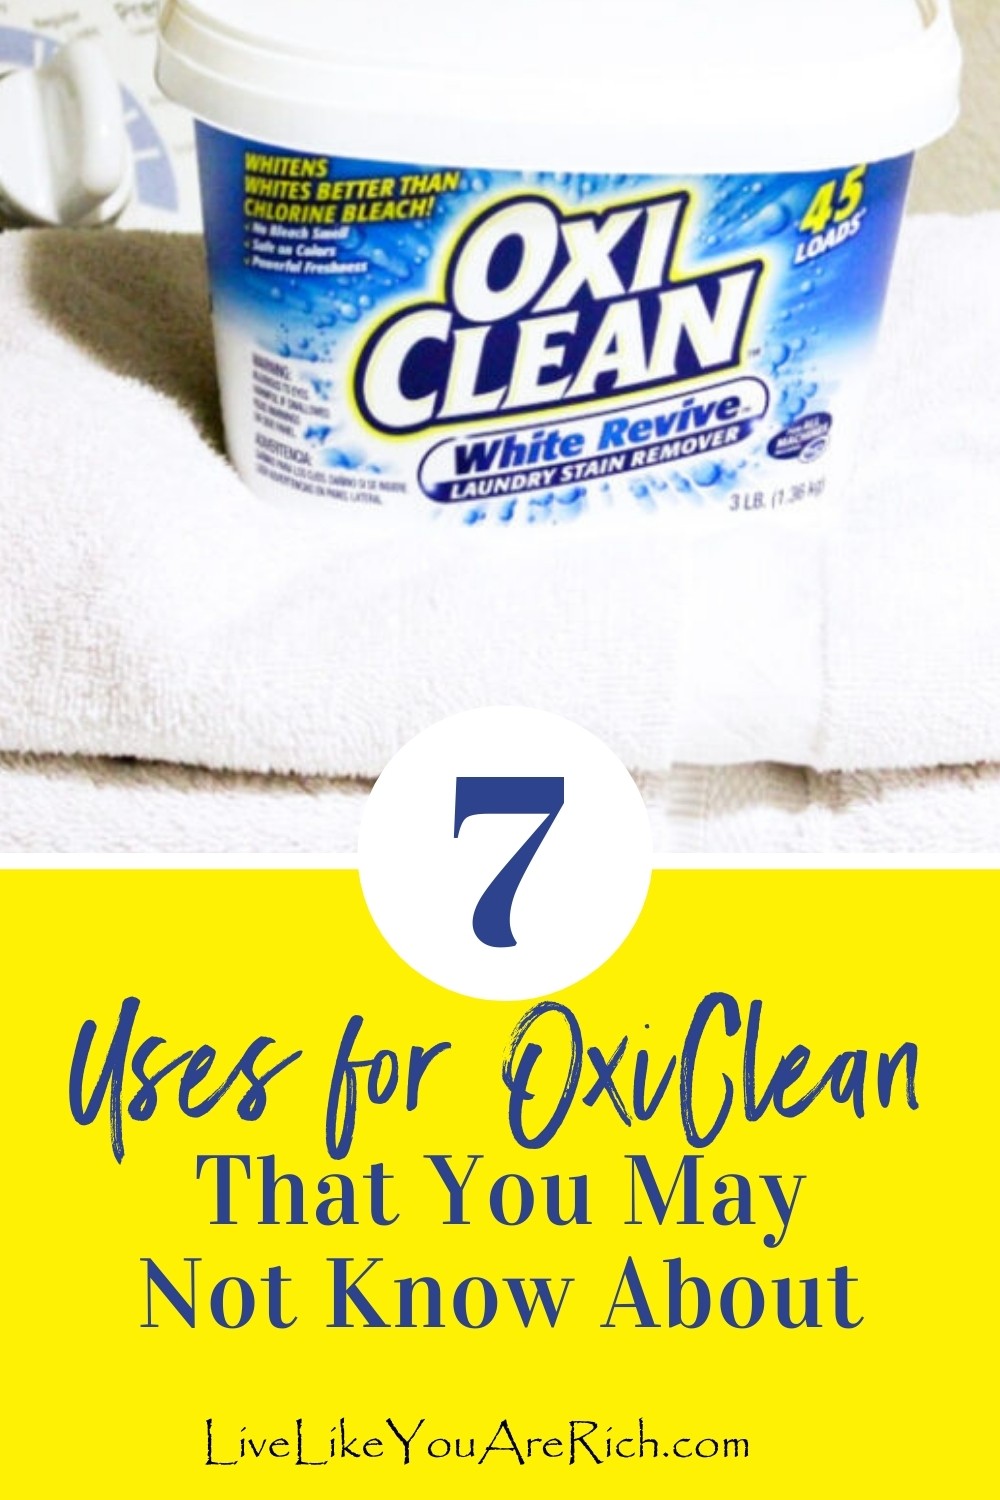 Here are 7 Uses for OxiClean That You May Not Know About. Life can get chaotic—but who wants to spend all day scrubbing dirt and stains? I use OxiClean in many of my cleaning routines. 